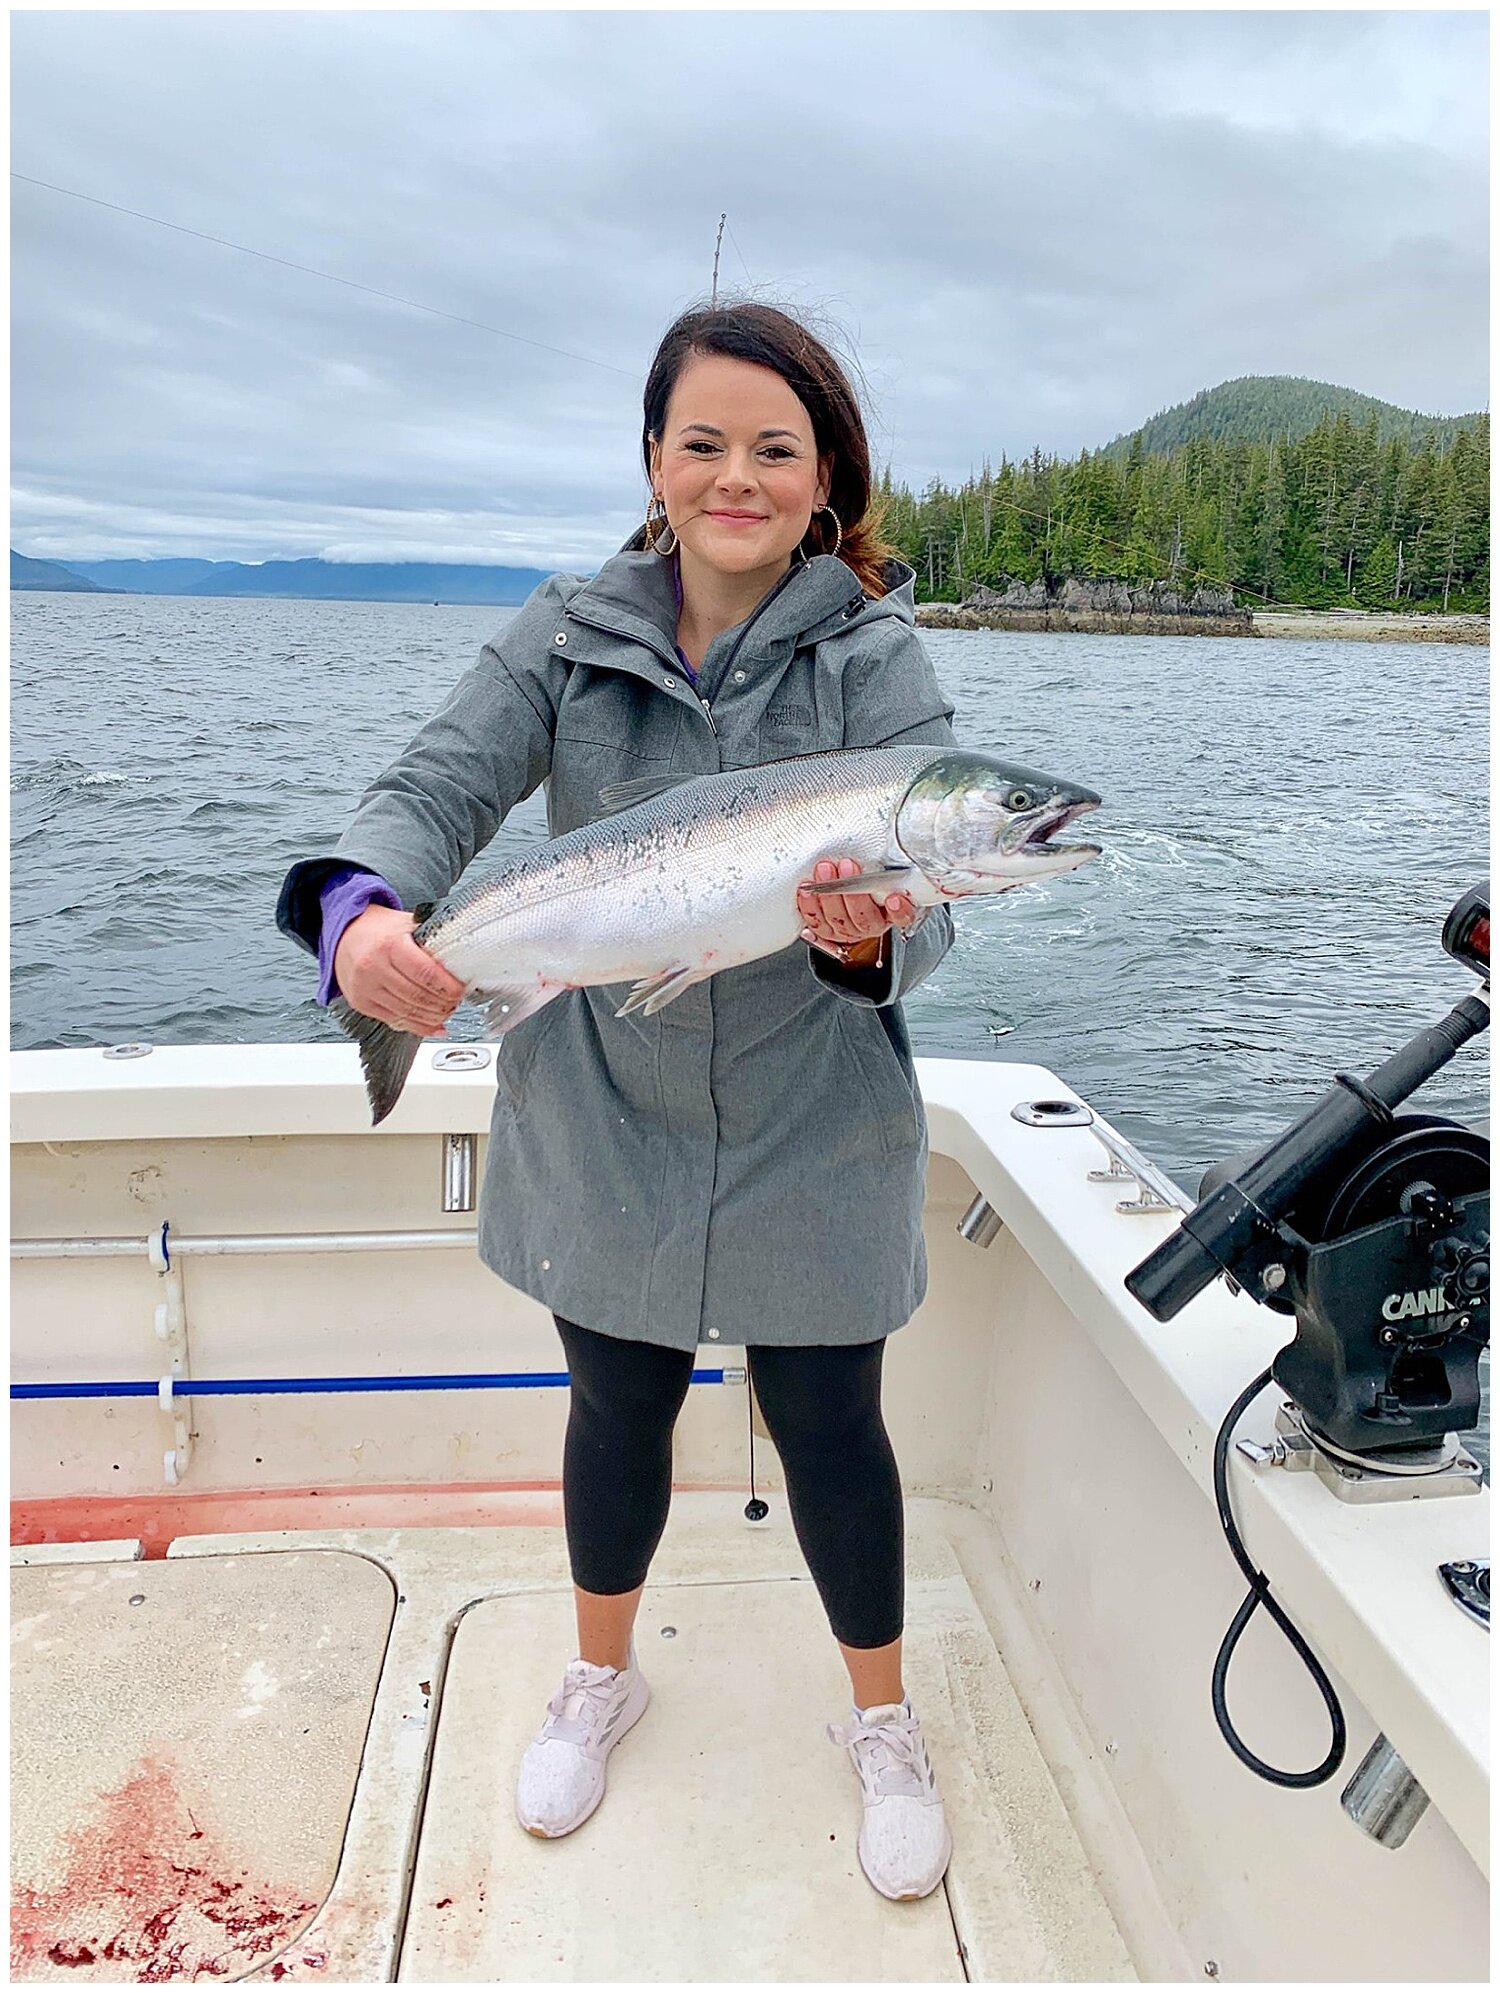  Caught my very first Salmon. 